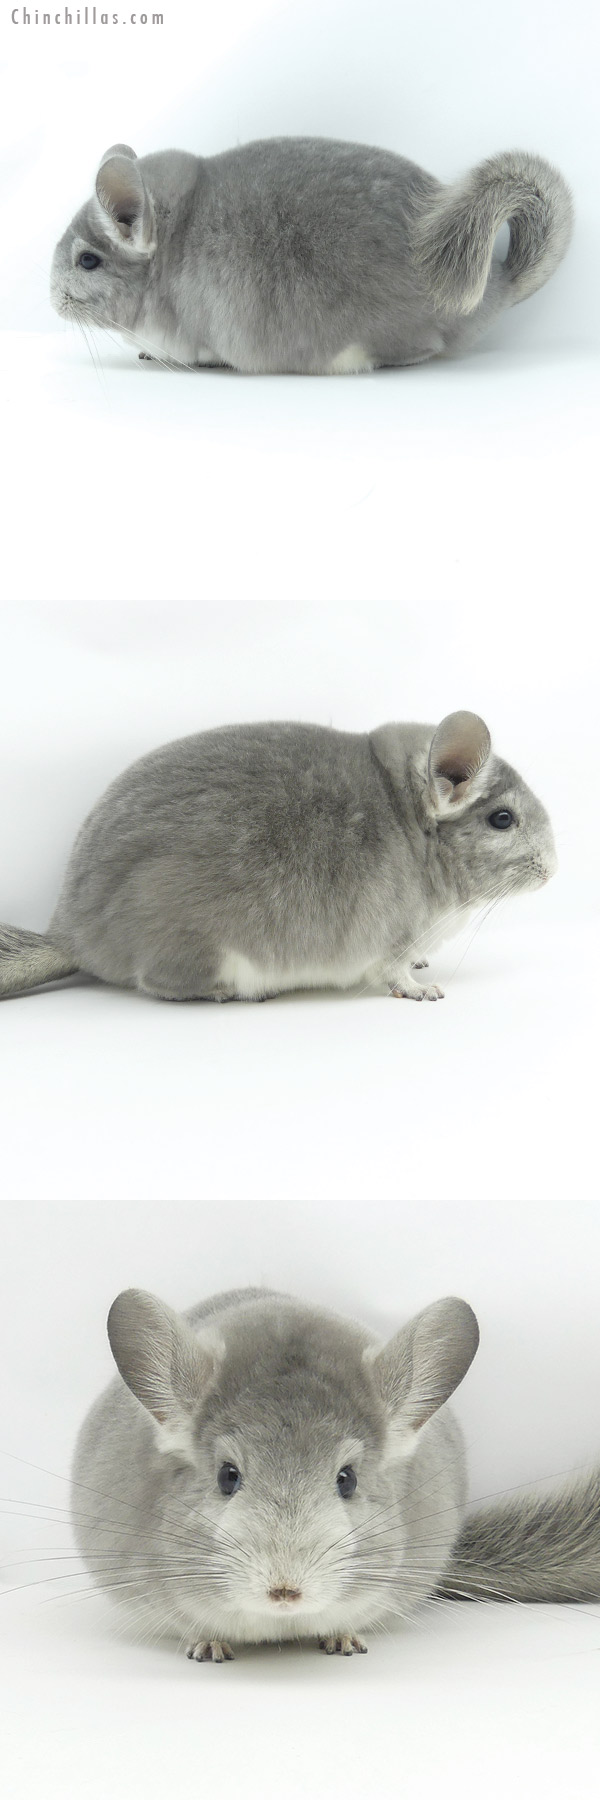 Chinchilla or related item offered for sale or export on Chinchillas.com - 19359 Large Blocky Premium Production Quality Violet Fading White Female Chinchilla